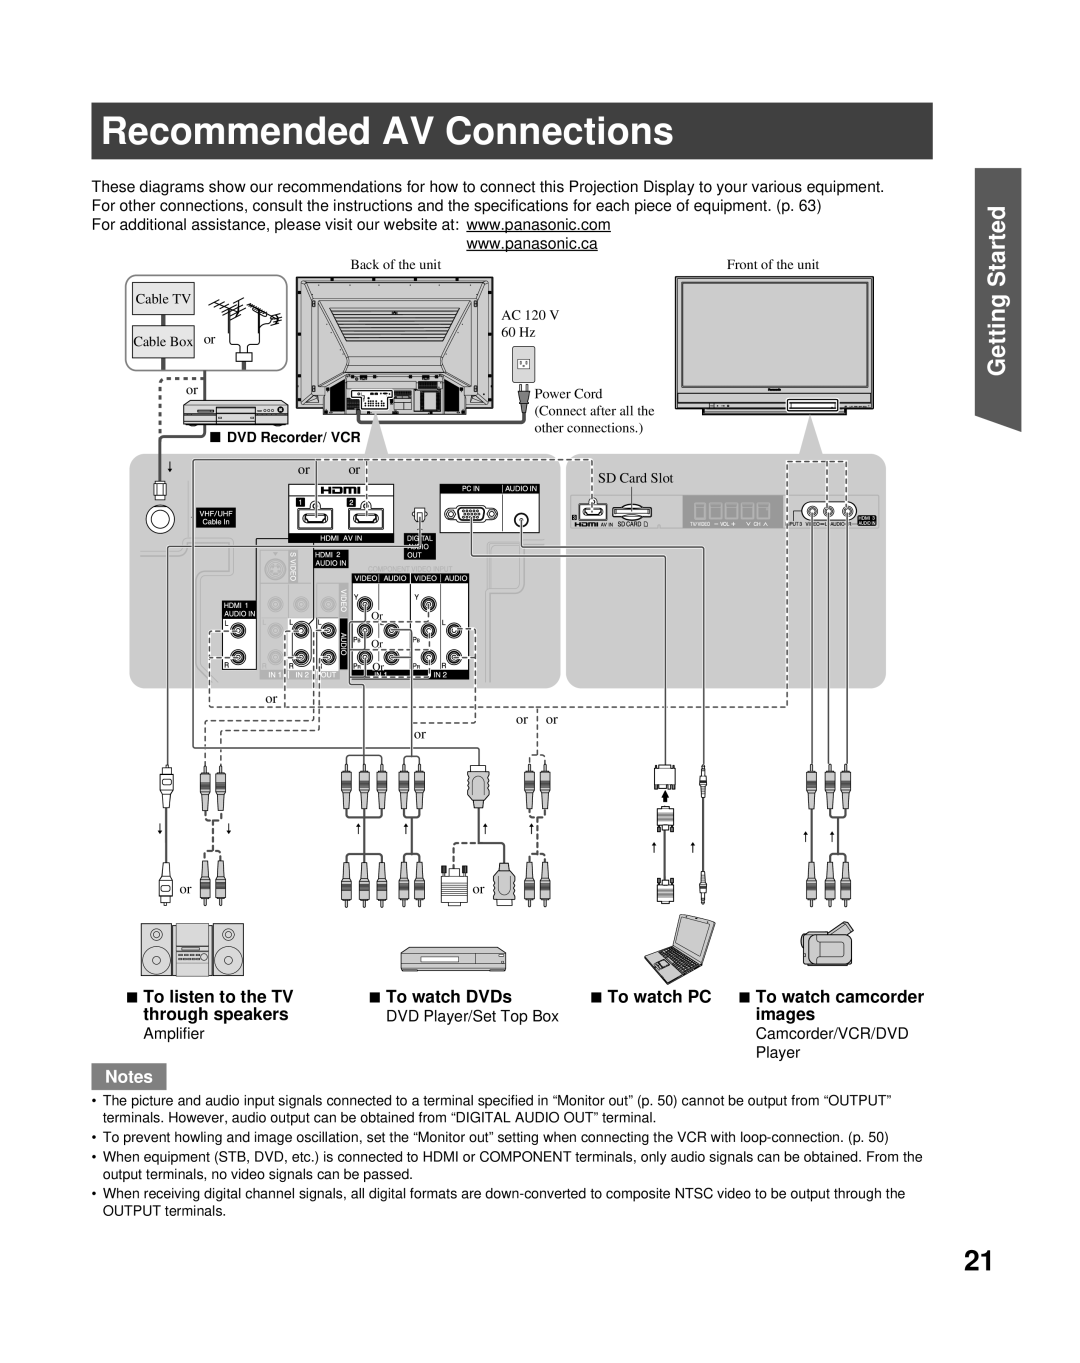 Panasonic PT-50LCZ70 Recommended AV Connections, Started, Getting, To listen to the TV, To watch DVDs, through speakers 